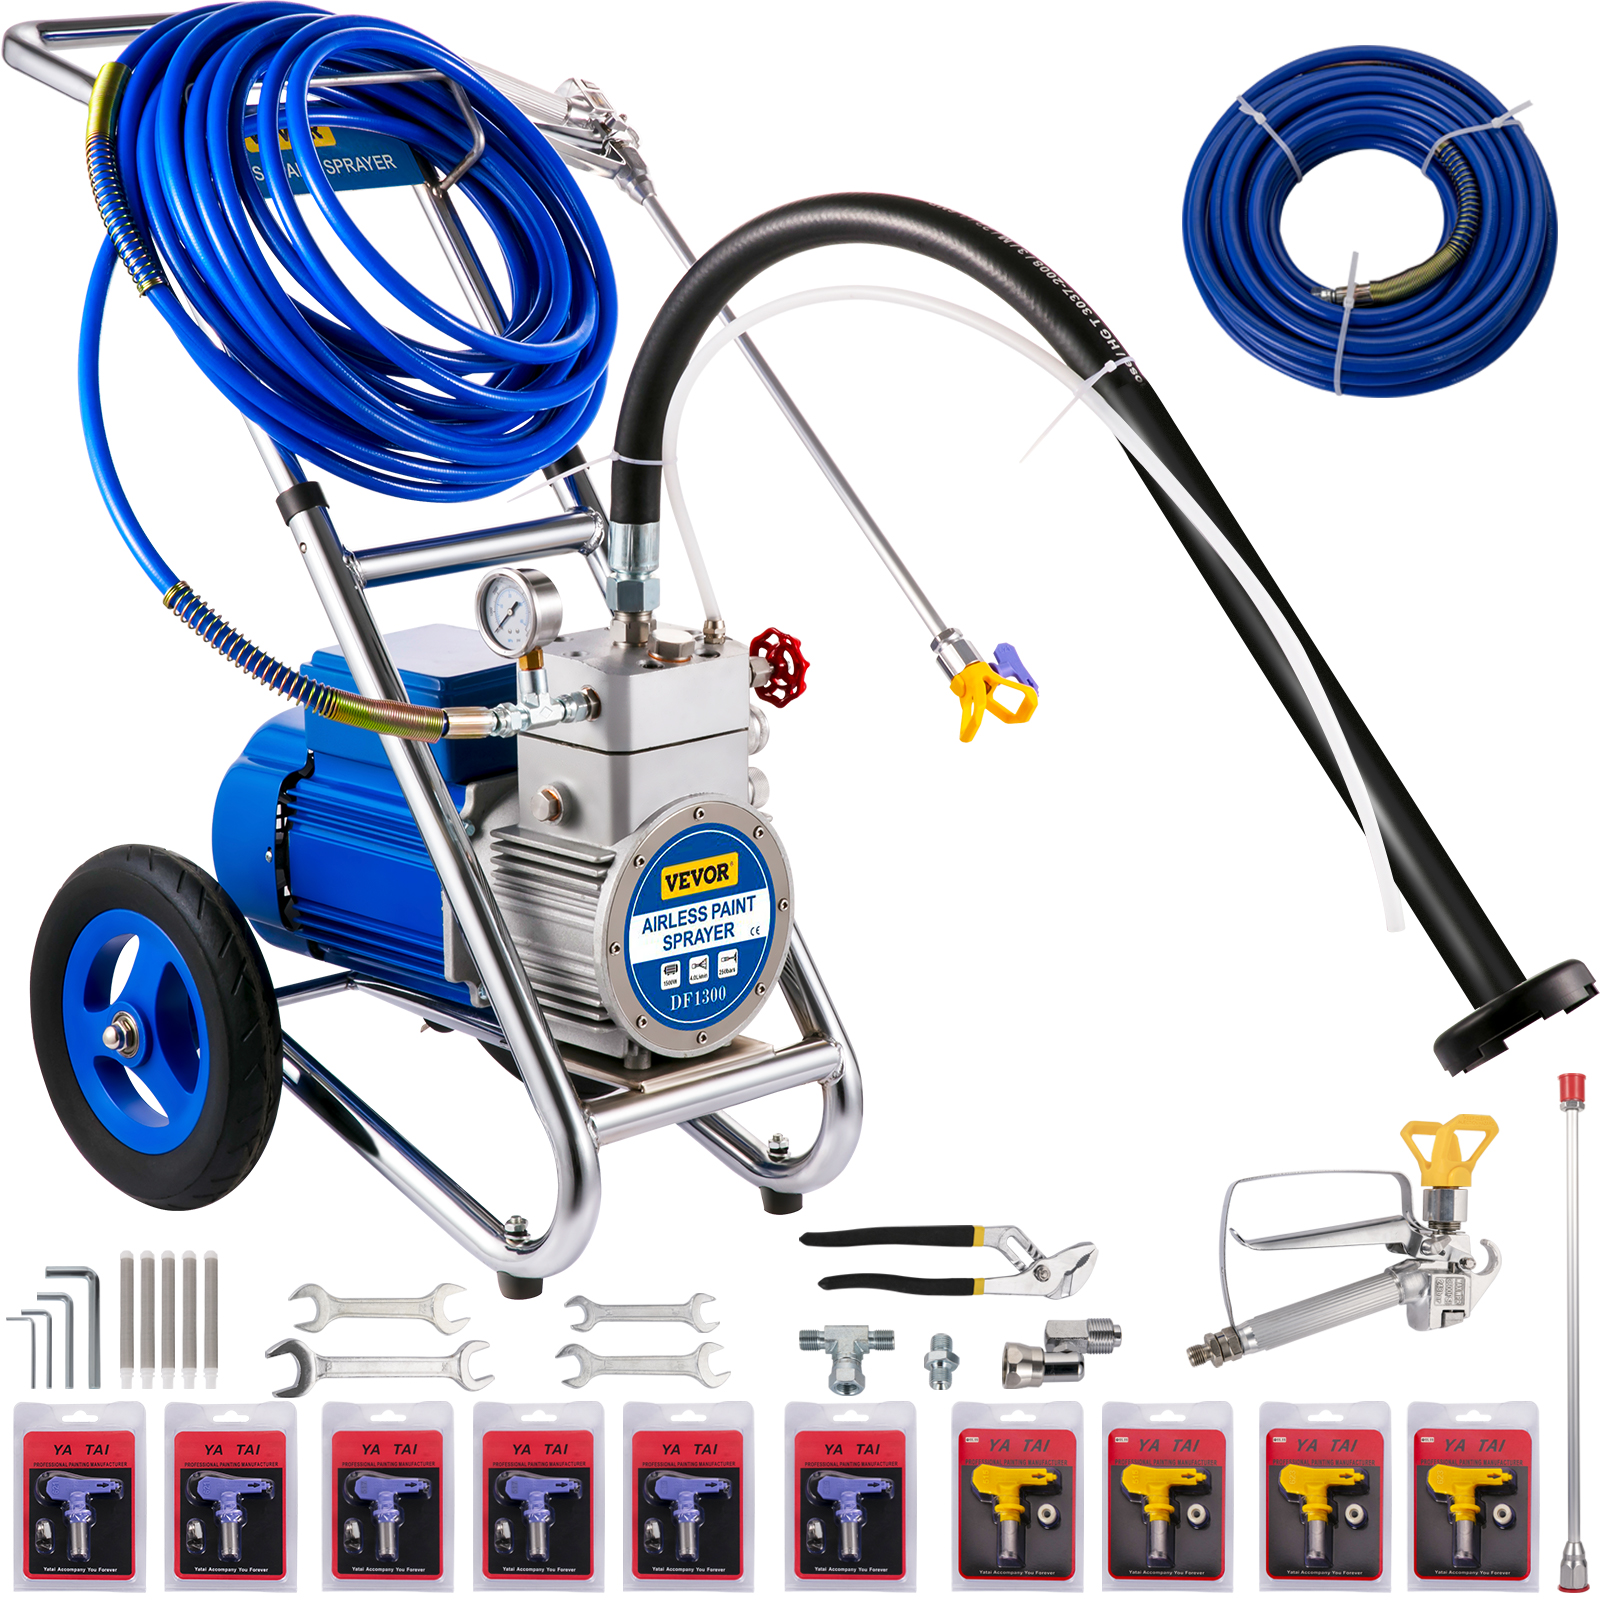 VEVOR VEVOR Cart Airless Paint Sprayer, 1500W Commercial Paint Sprayer,  1GPM Airless Paint Sprayer, Paint Sprayers for Home Interior and Exterior  While Delivering Softer and Well-Distributed Spray VEVOR EU